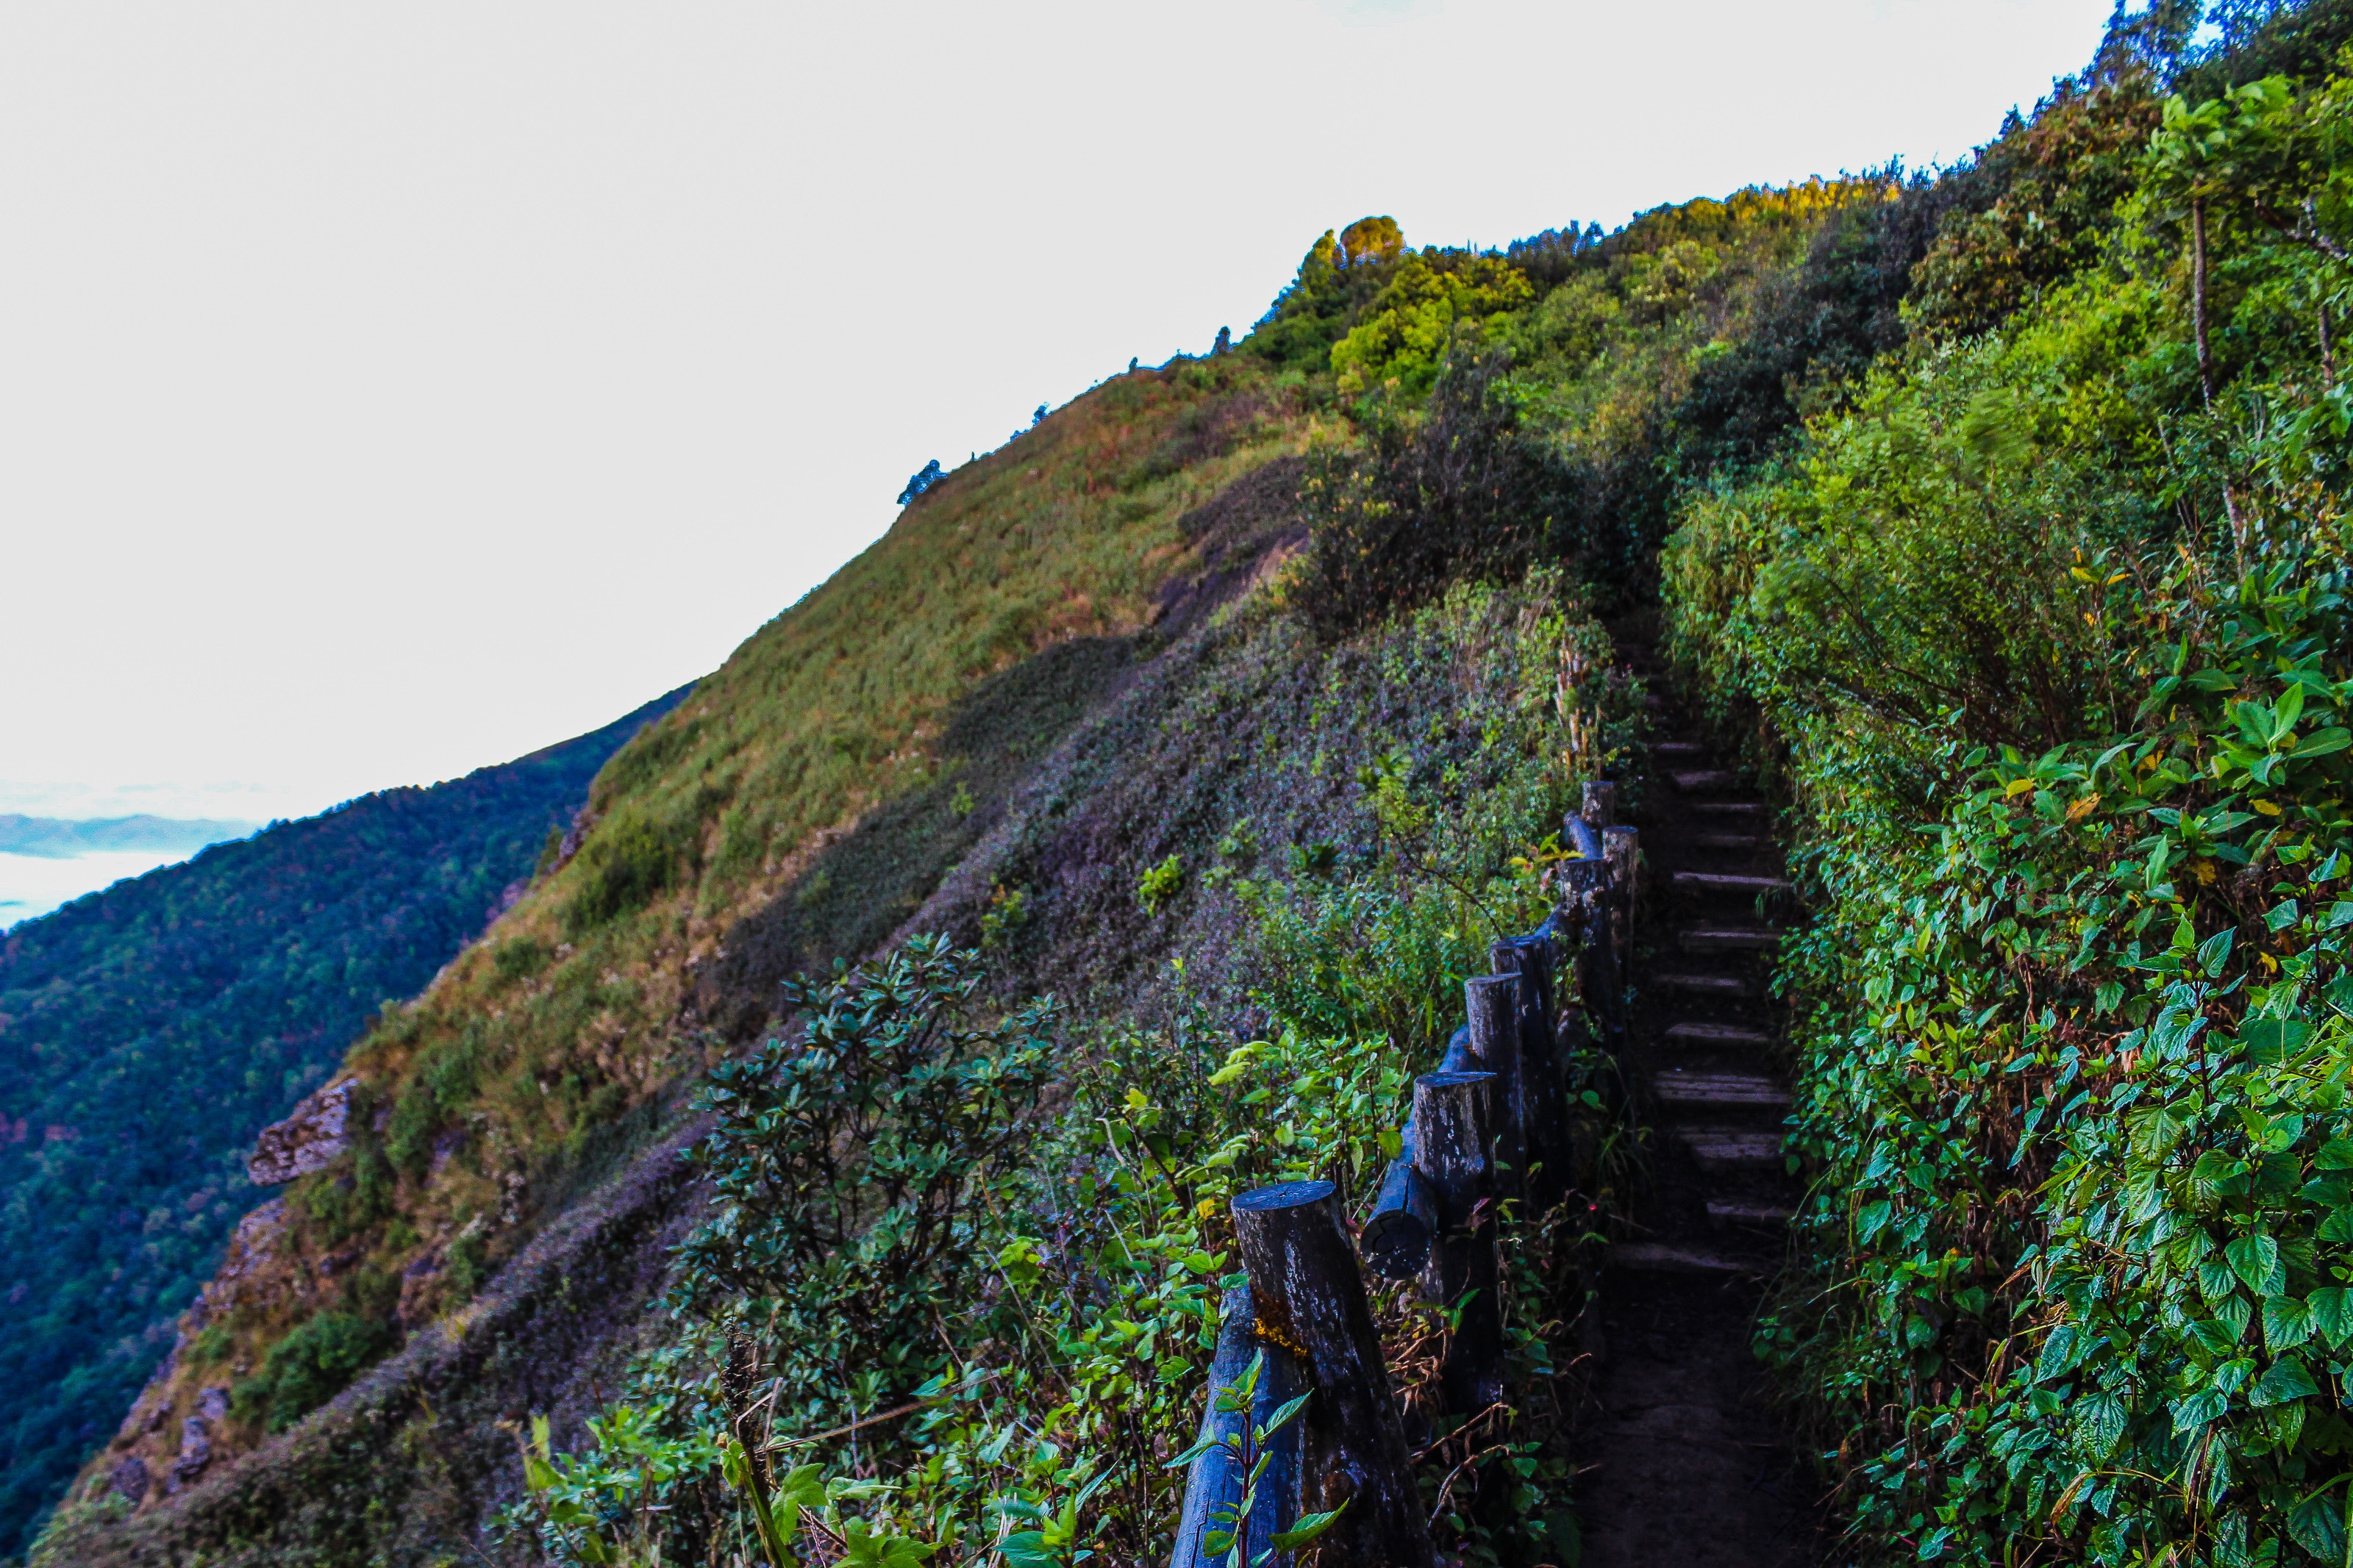 Pathway on mountain with blue wooden handrails at daytime photo